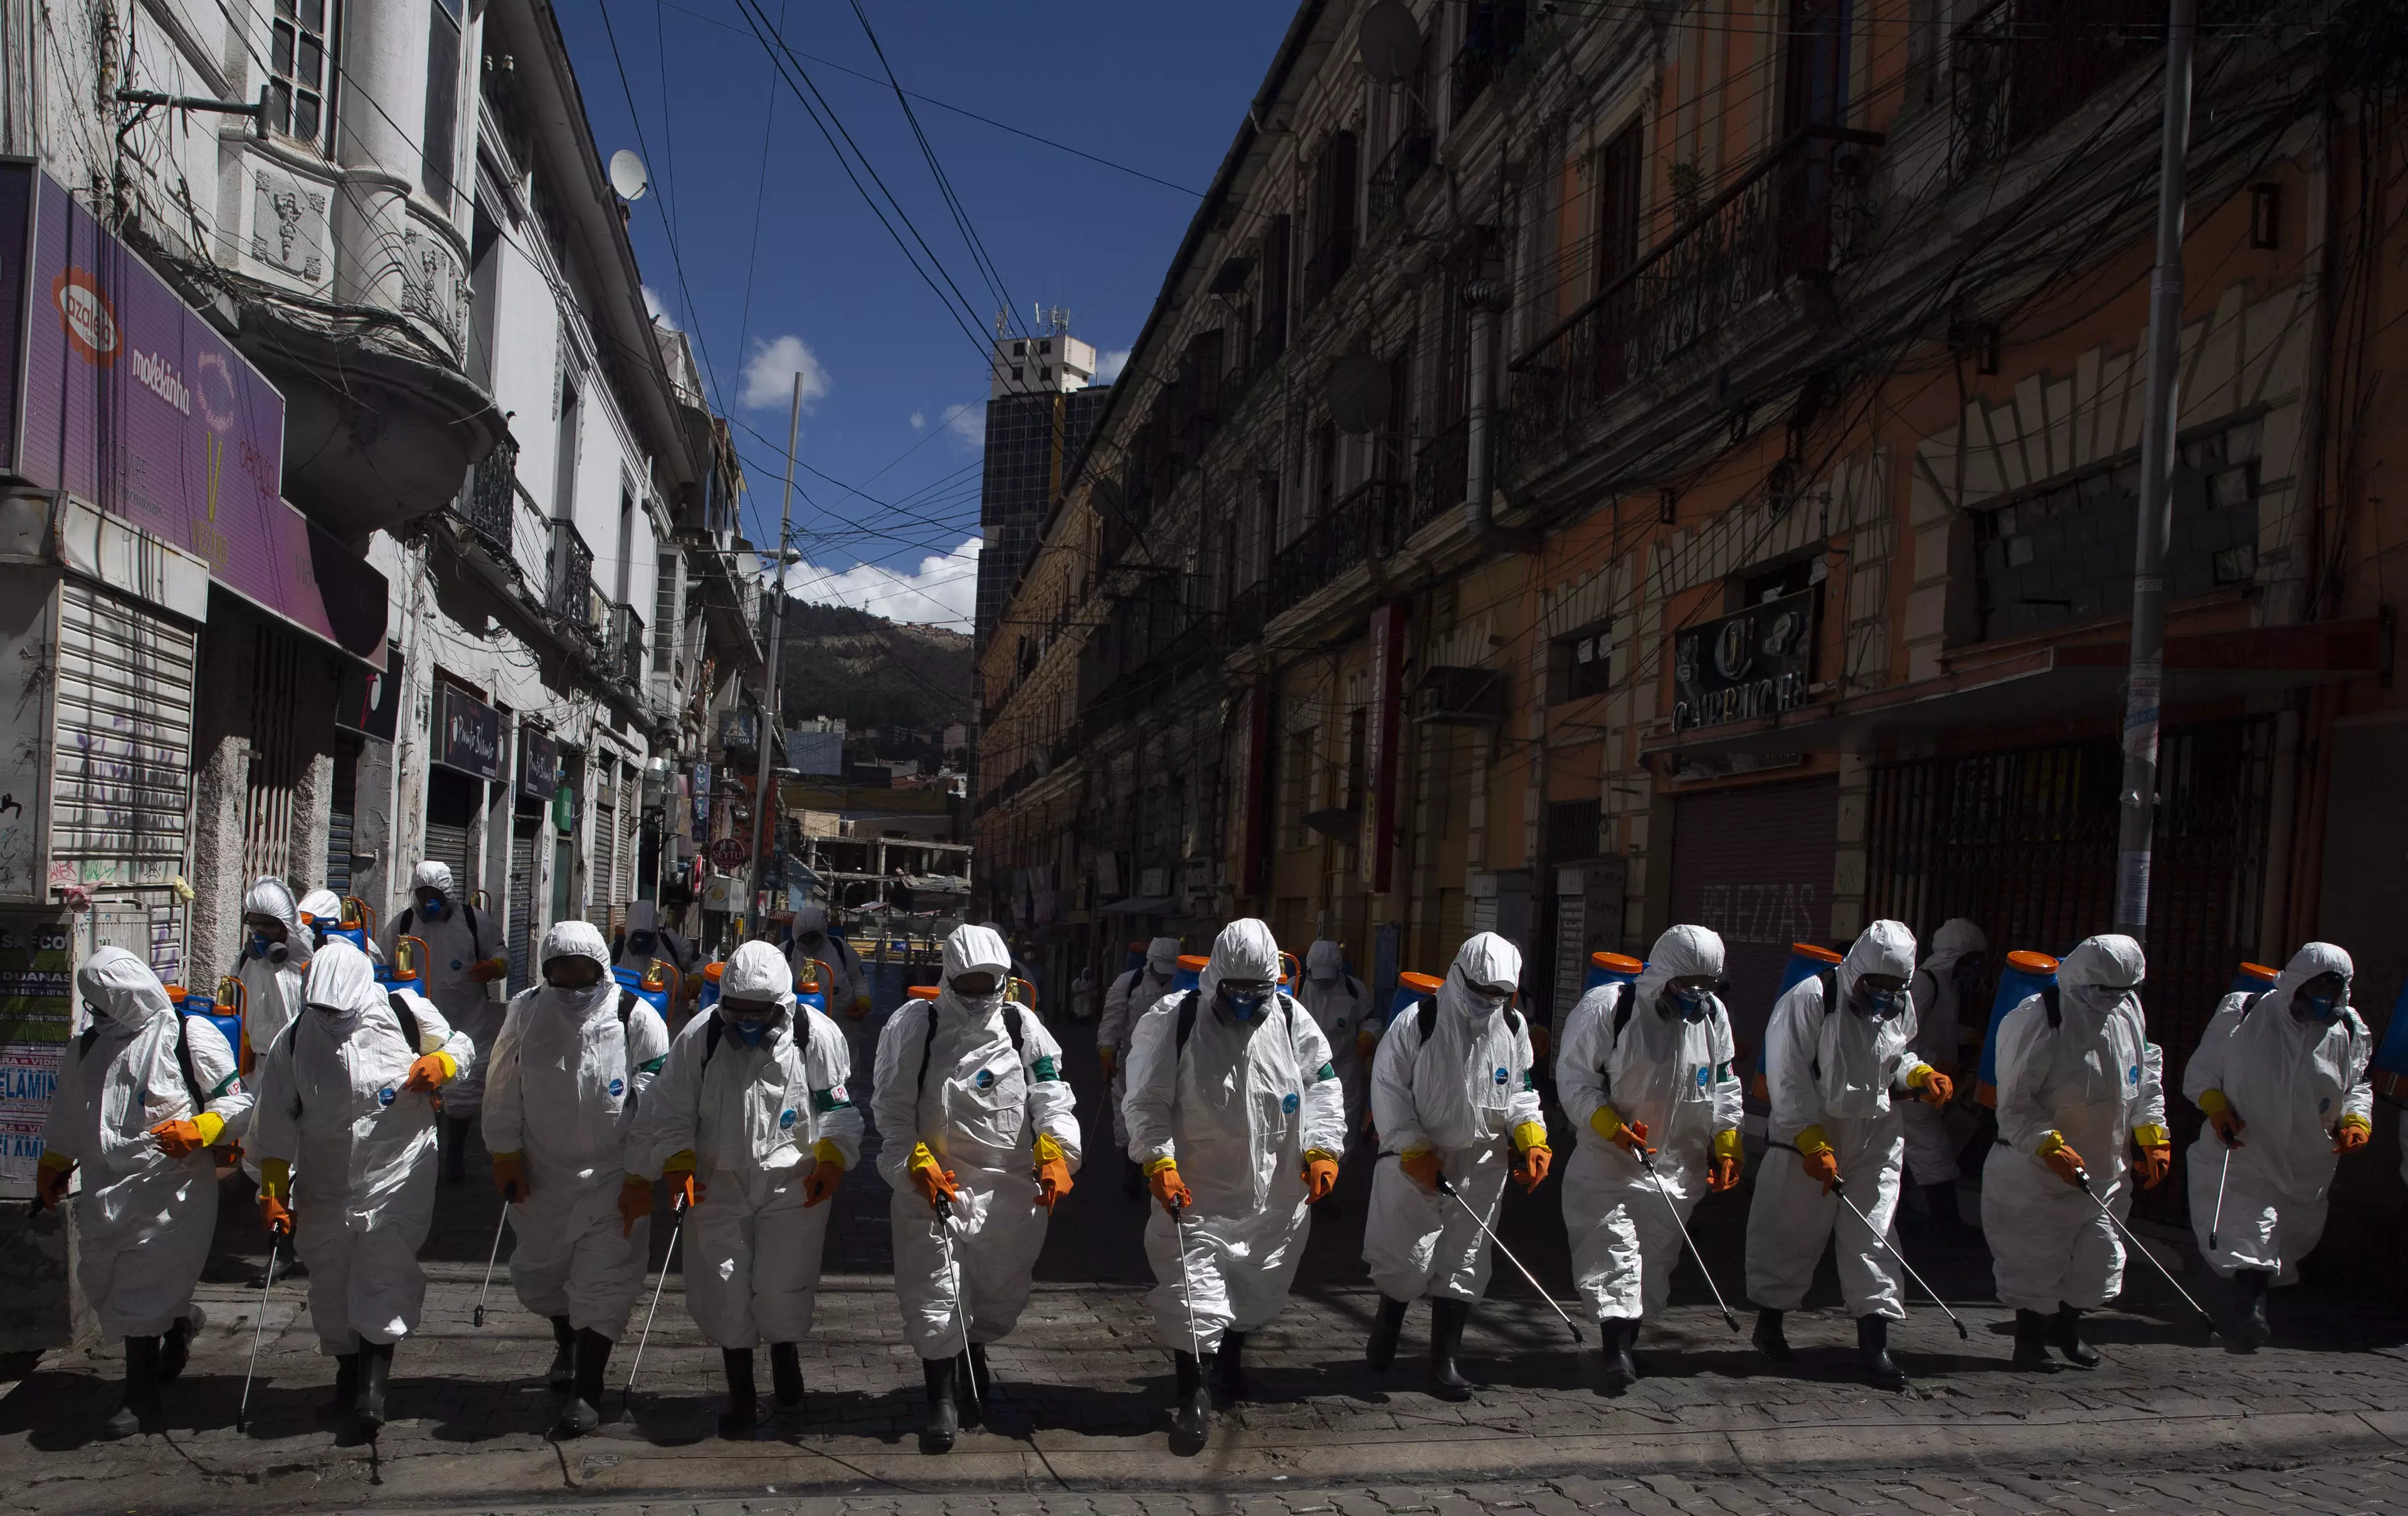 Workers in Bolivia trying to decontaminate the streets of Covid-19.